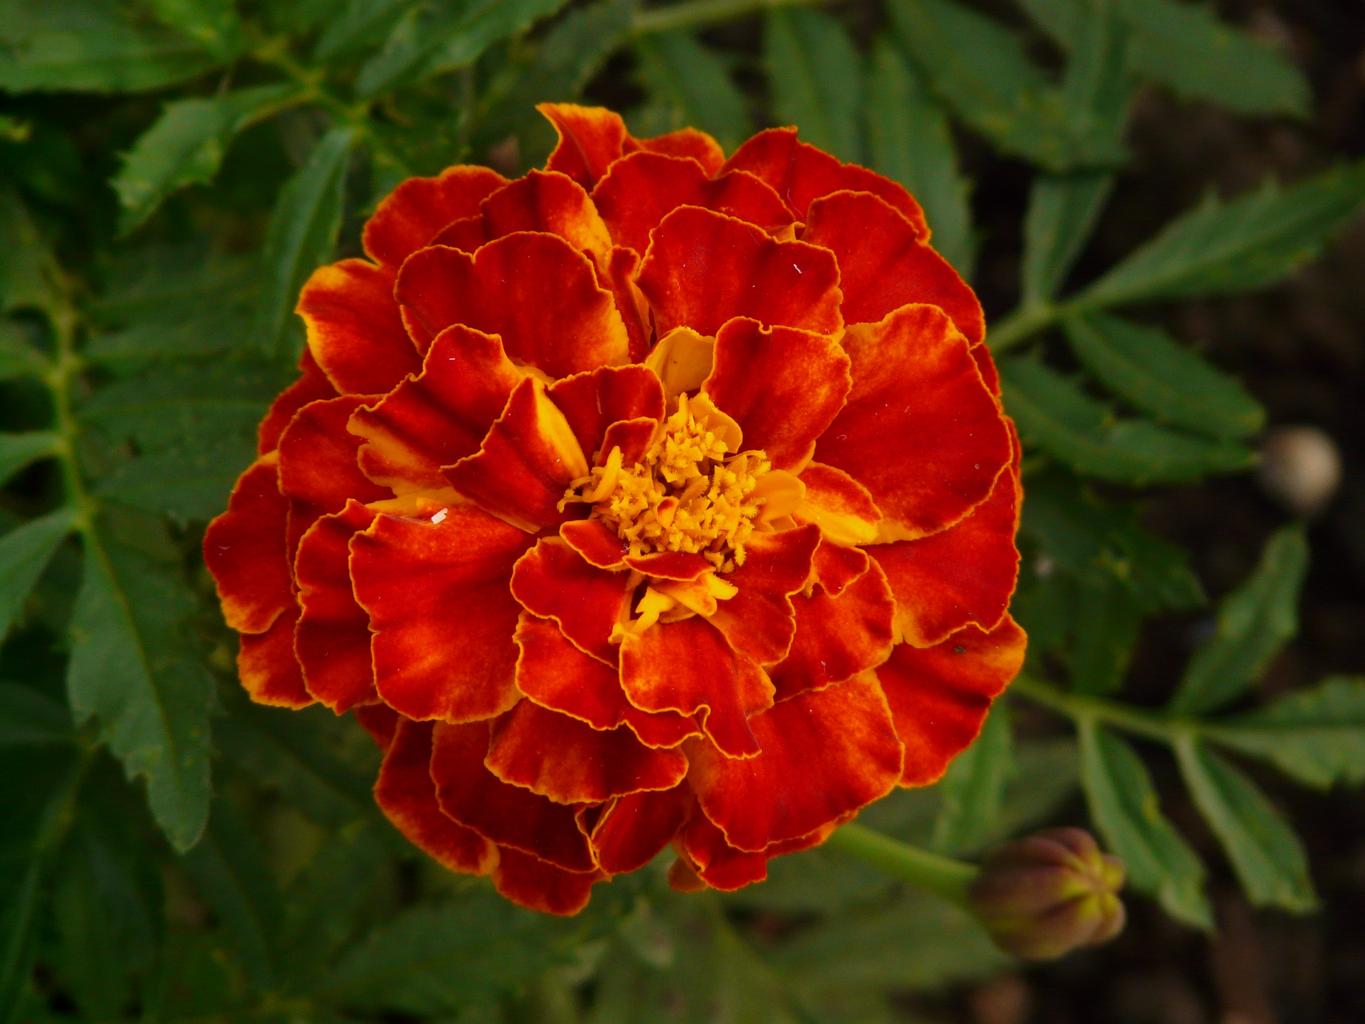 Marigolds are known for being cheerful and happy. Read on to discover more reasons why marigold is the flower of October